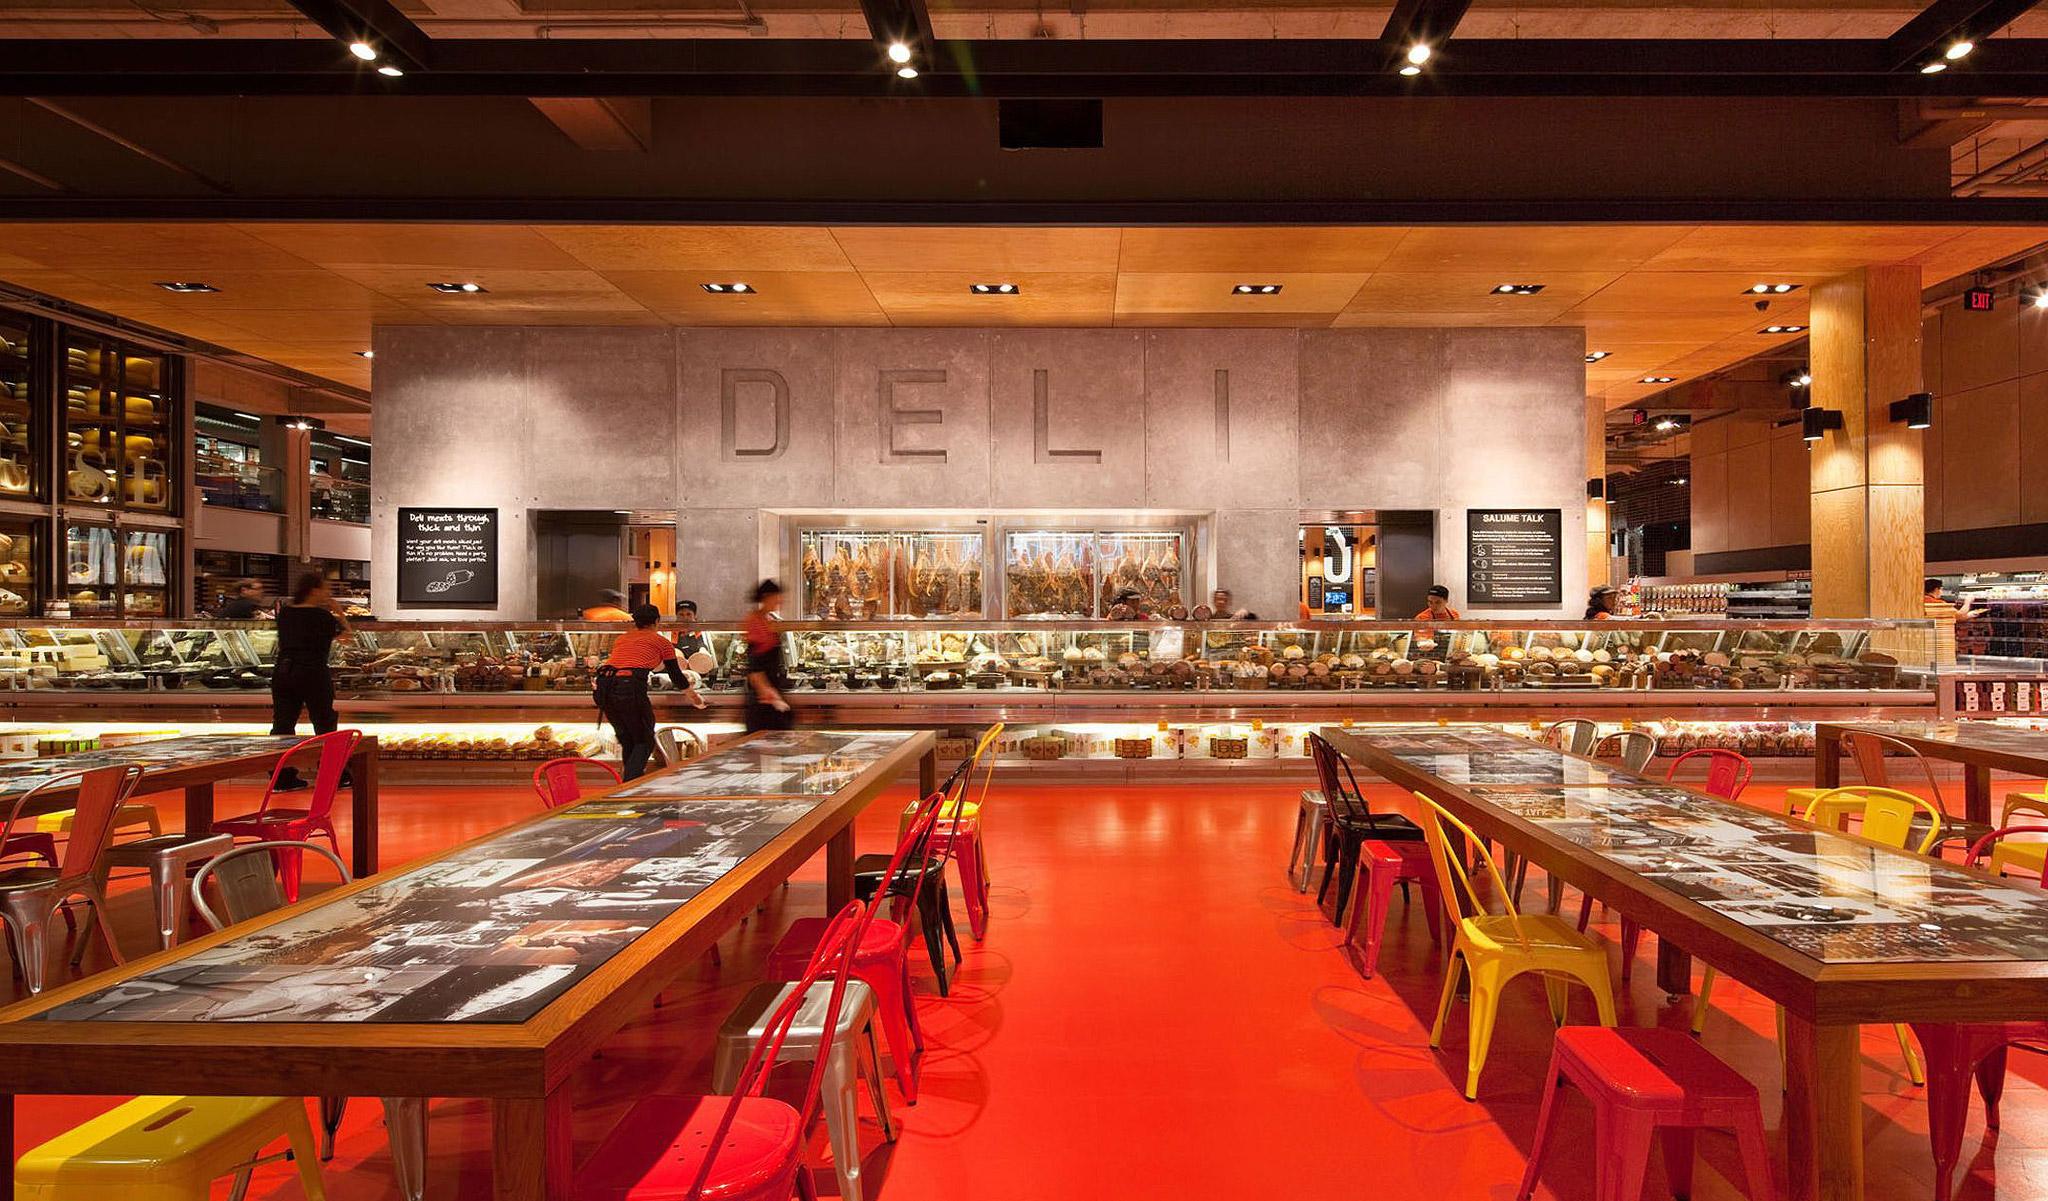 Deli & food court Loblaws supermarket design innovation new concepts and retail ideas